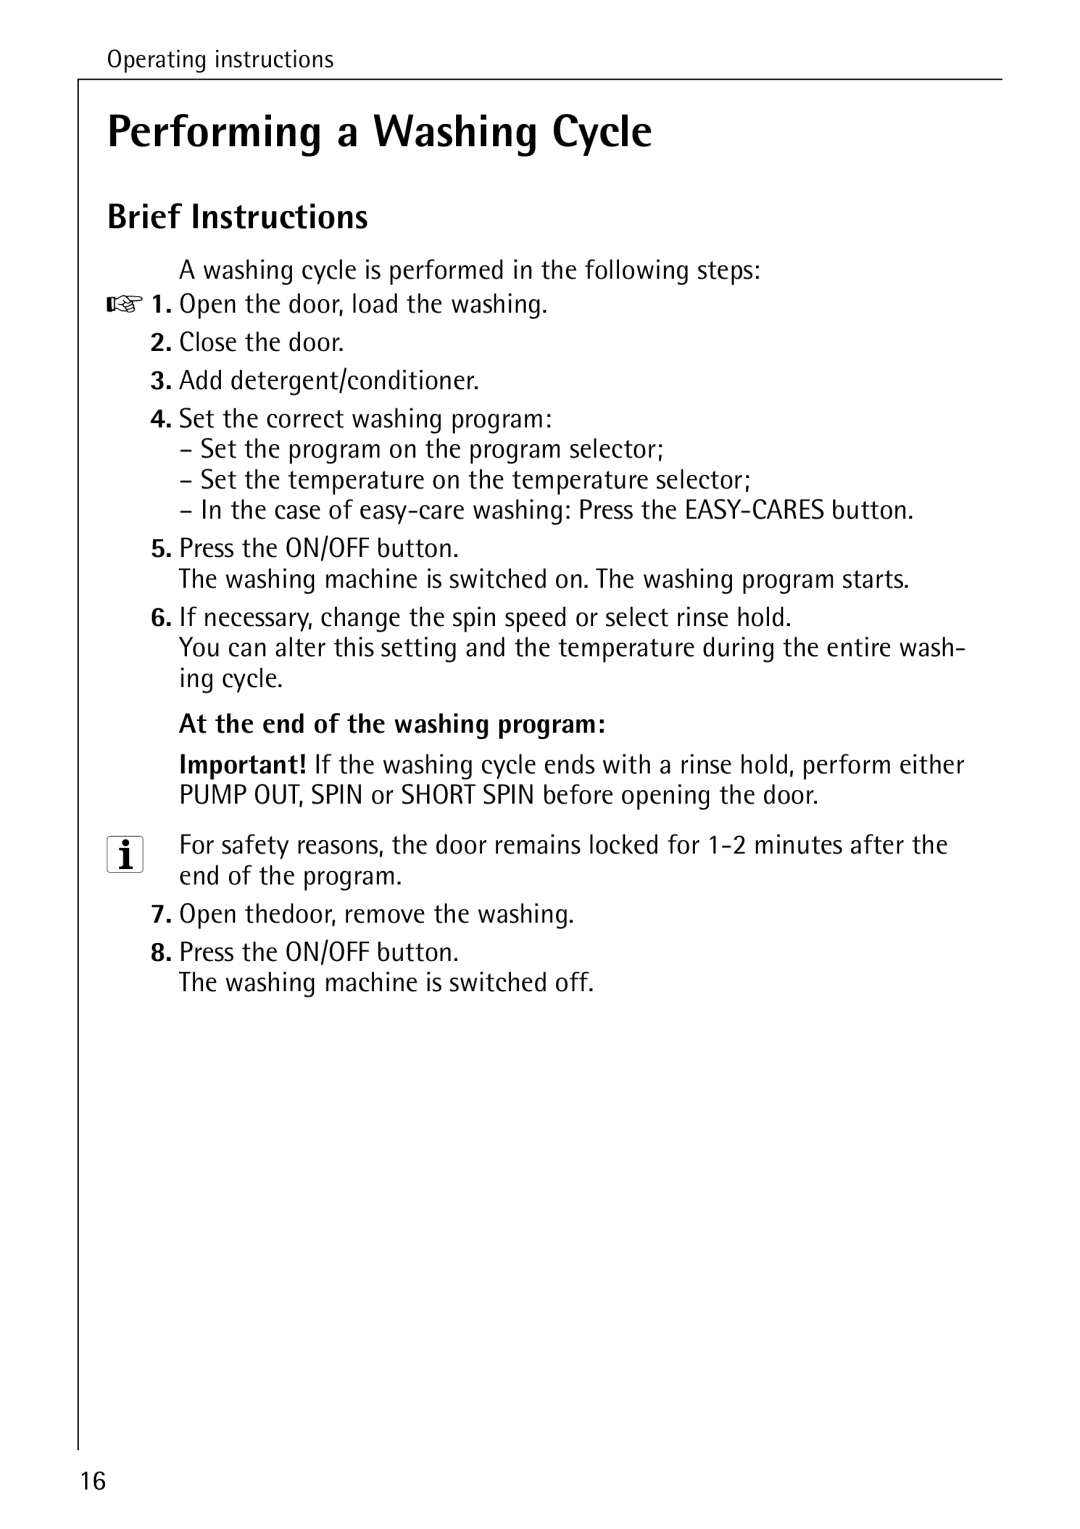 AEG W 1030 manual Performing a Washing Cycle, Brief Instructions, At the end of the washing program 